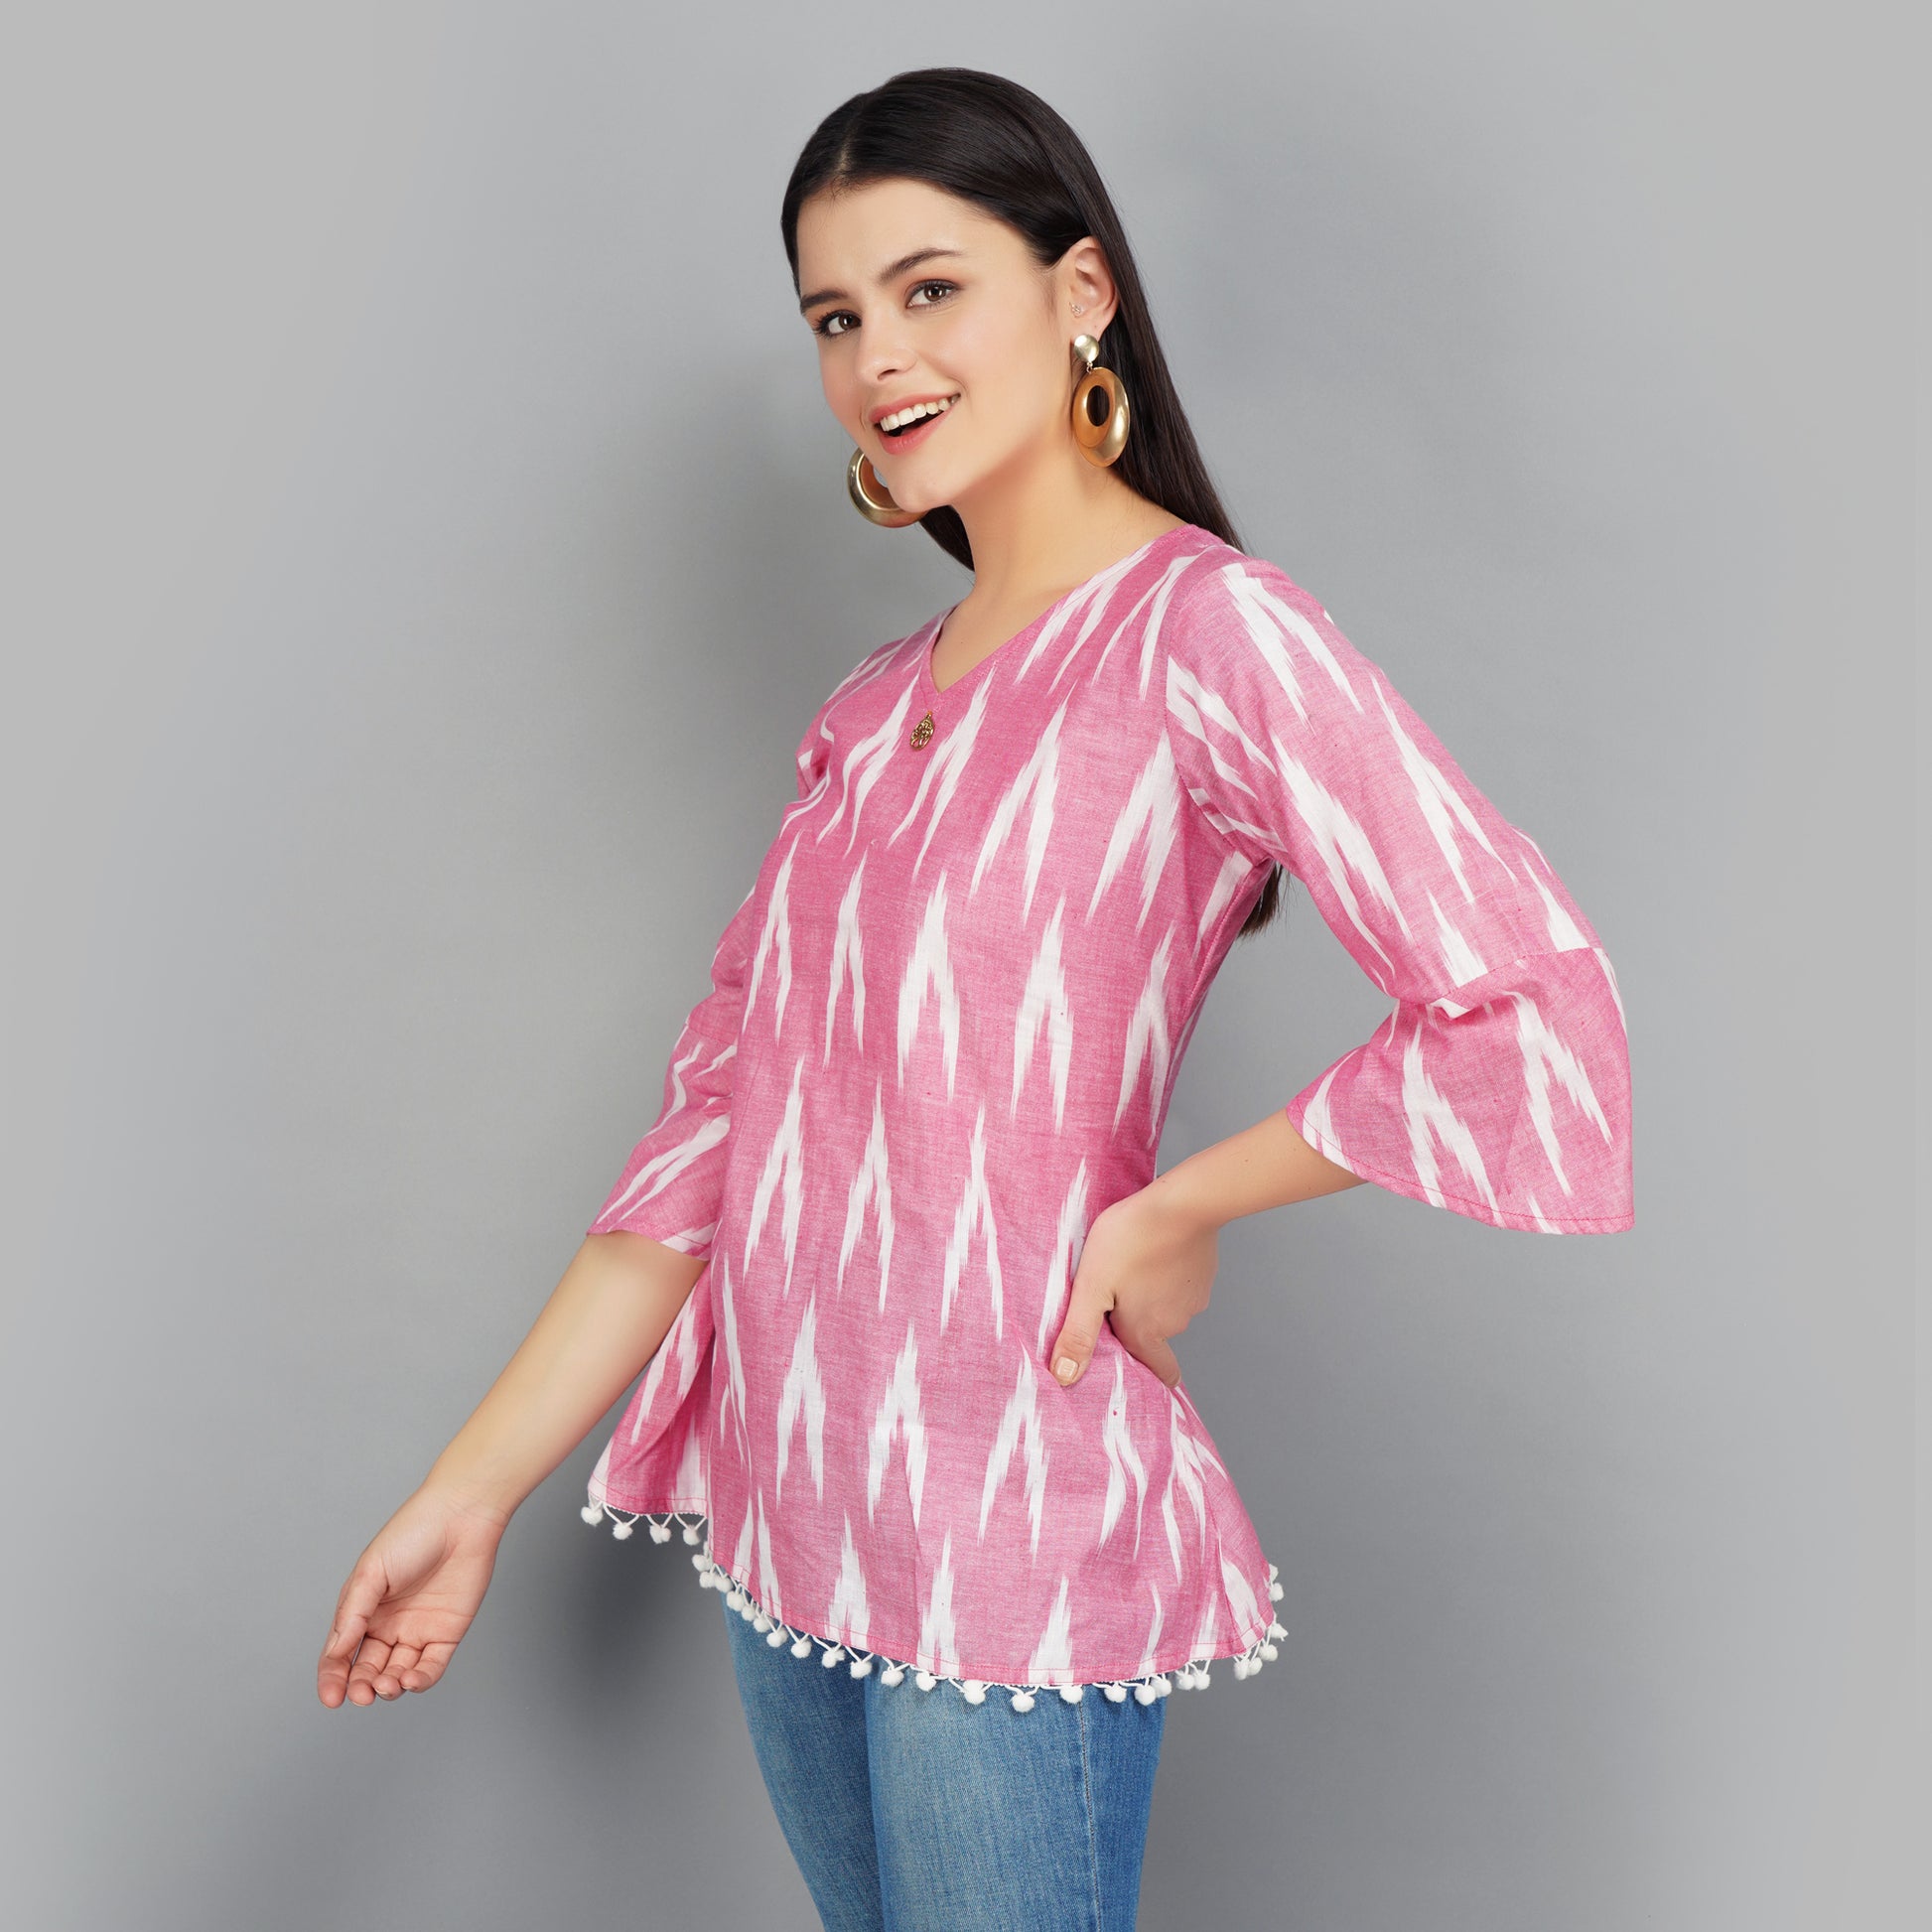 Pink cotton top for women